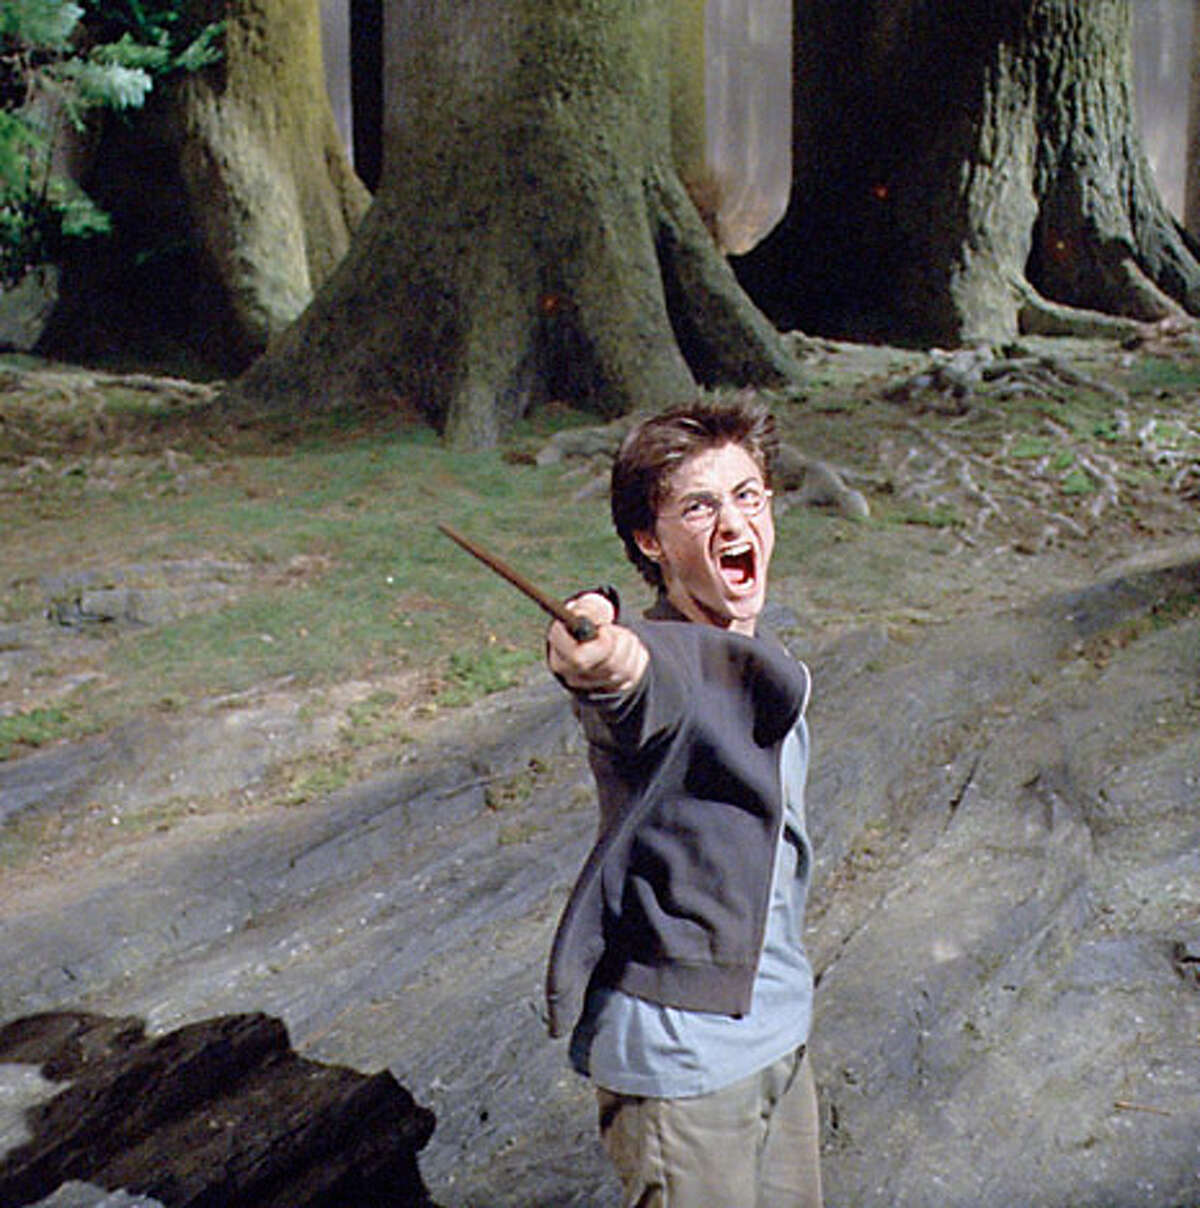 DANIEL RADCLIFFE as Harry Potter in Warner Bros. Pictures� fantasy �Harry Potter and the Prisoner of Azkaban.� PHOTOGRAPHS TO BE USED SOLELY FOR ADVERTISING, PROMOTION, PUBLICITY OR REVIEWS OF THIS SPECIFIC MOTION PICTURE AND TO REMAIN THE PROPERTY OF THE STUDIO. NOT FOR SALE OR REDISTRIBUTION.